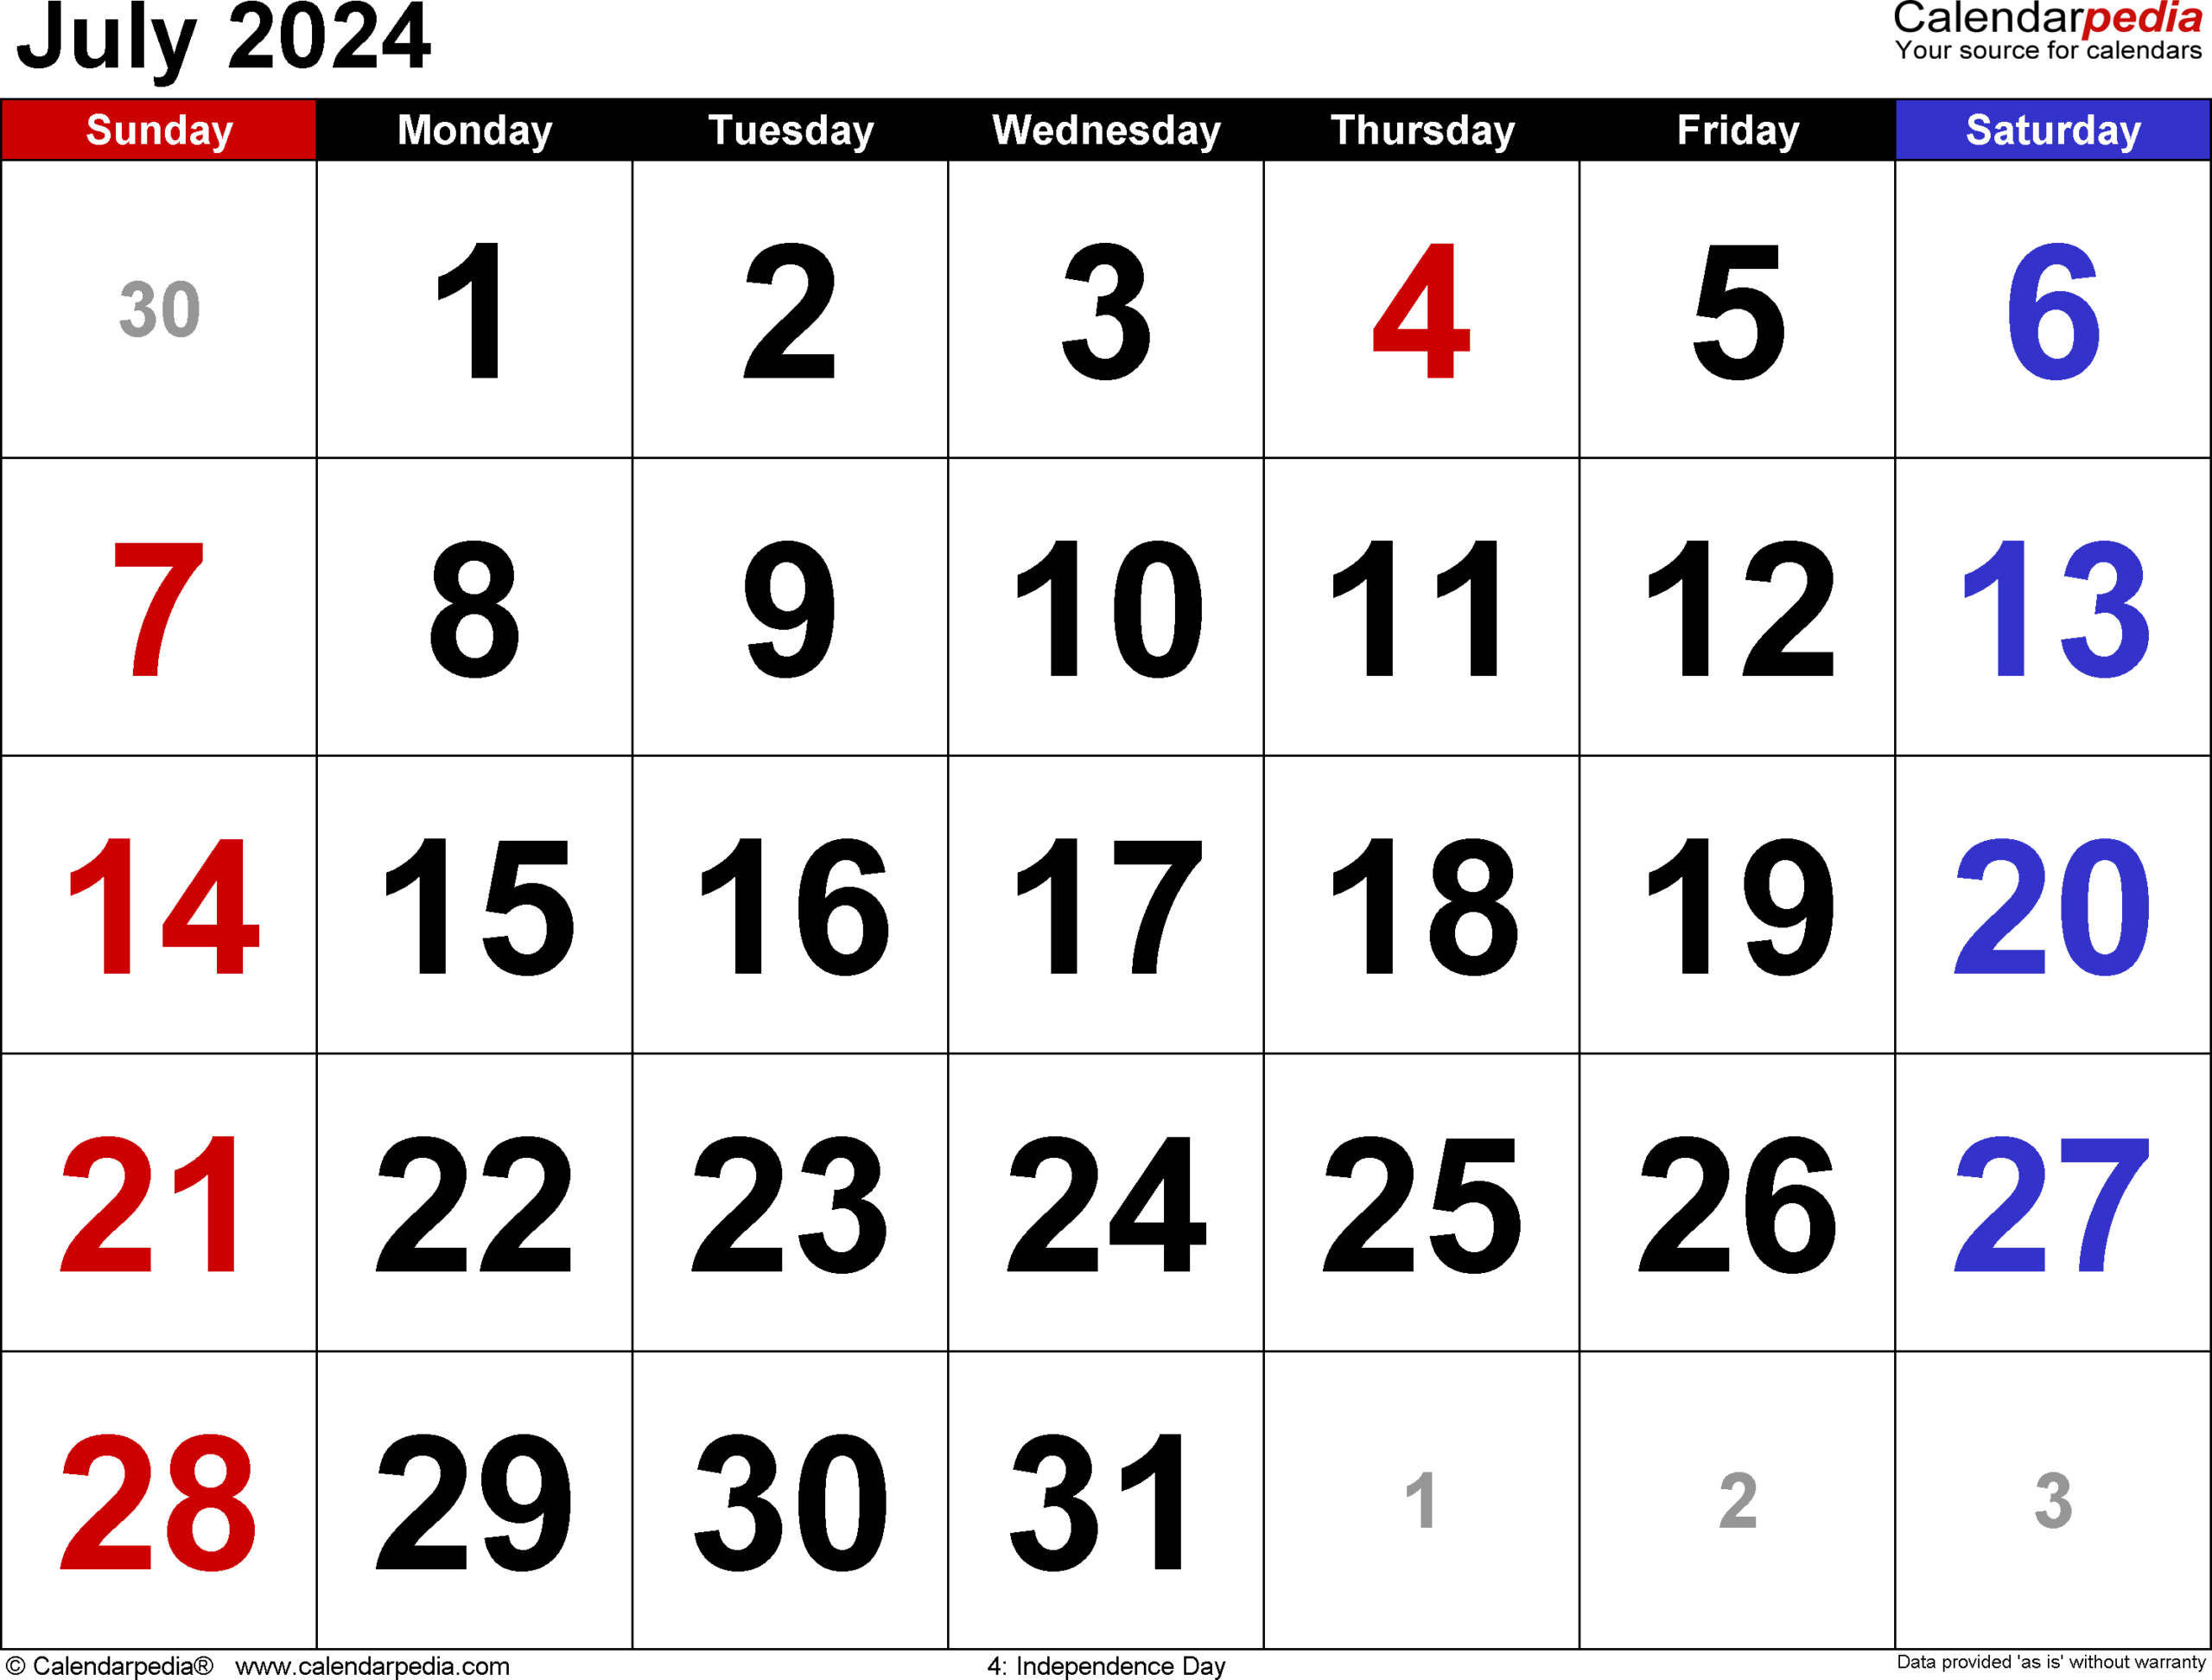 July 2024 Calendar | Templates For Word, Excel And Pdf intended for Tax Calendar July 2024